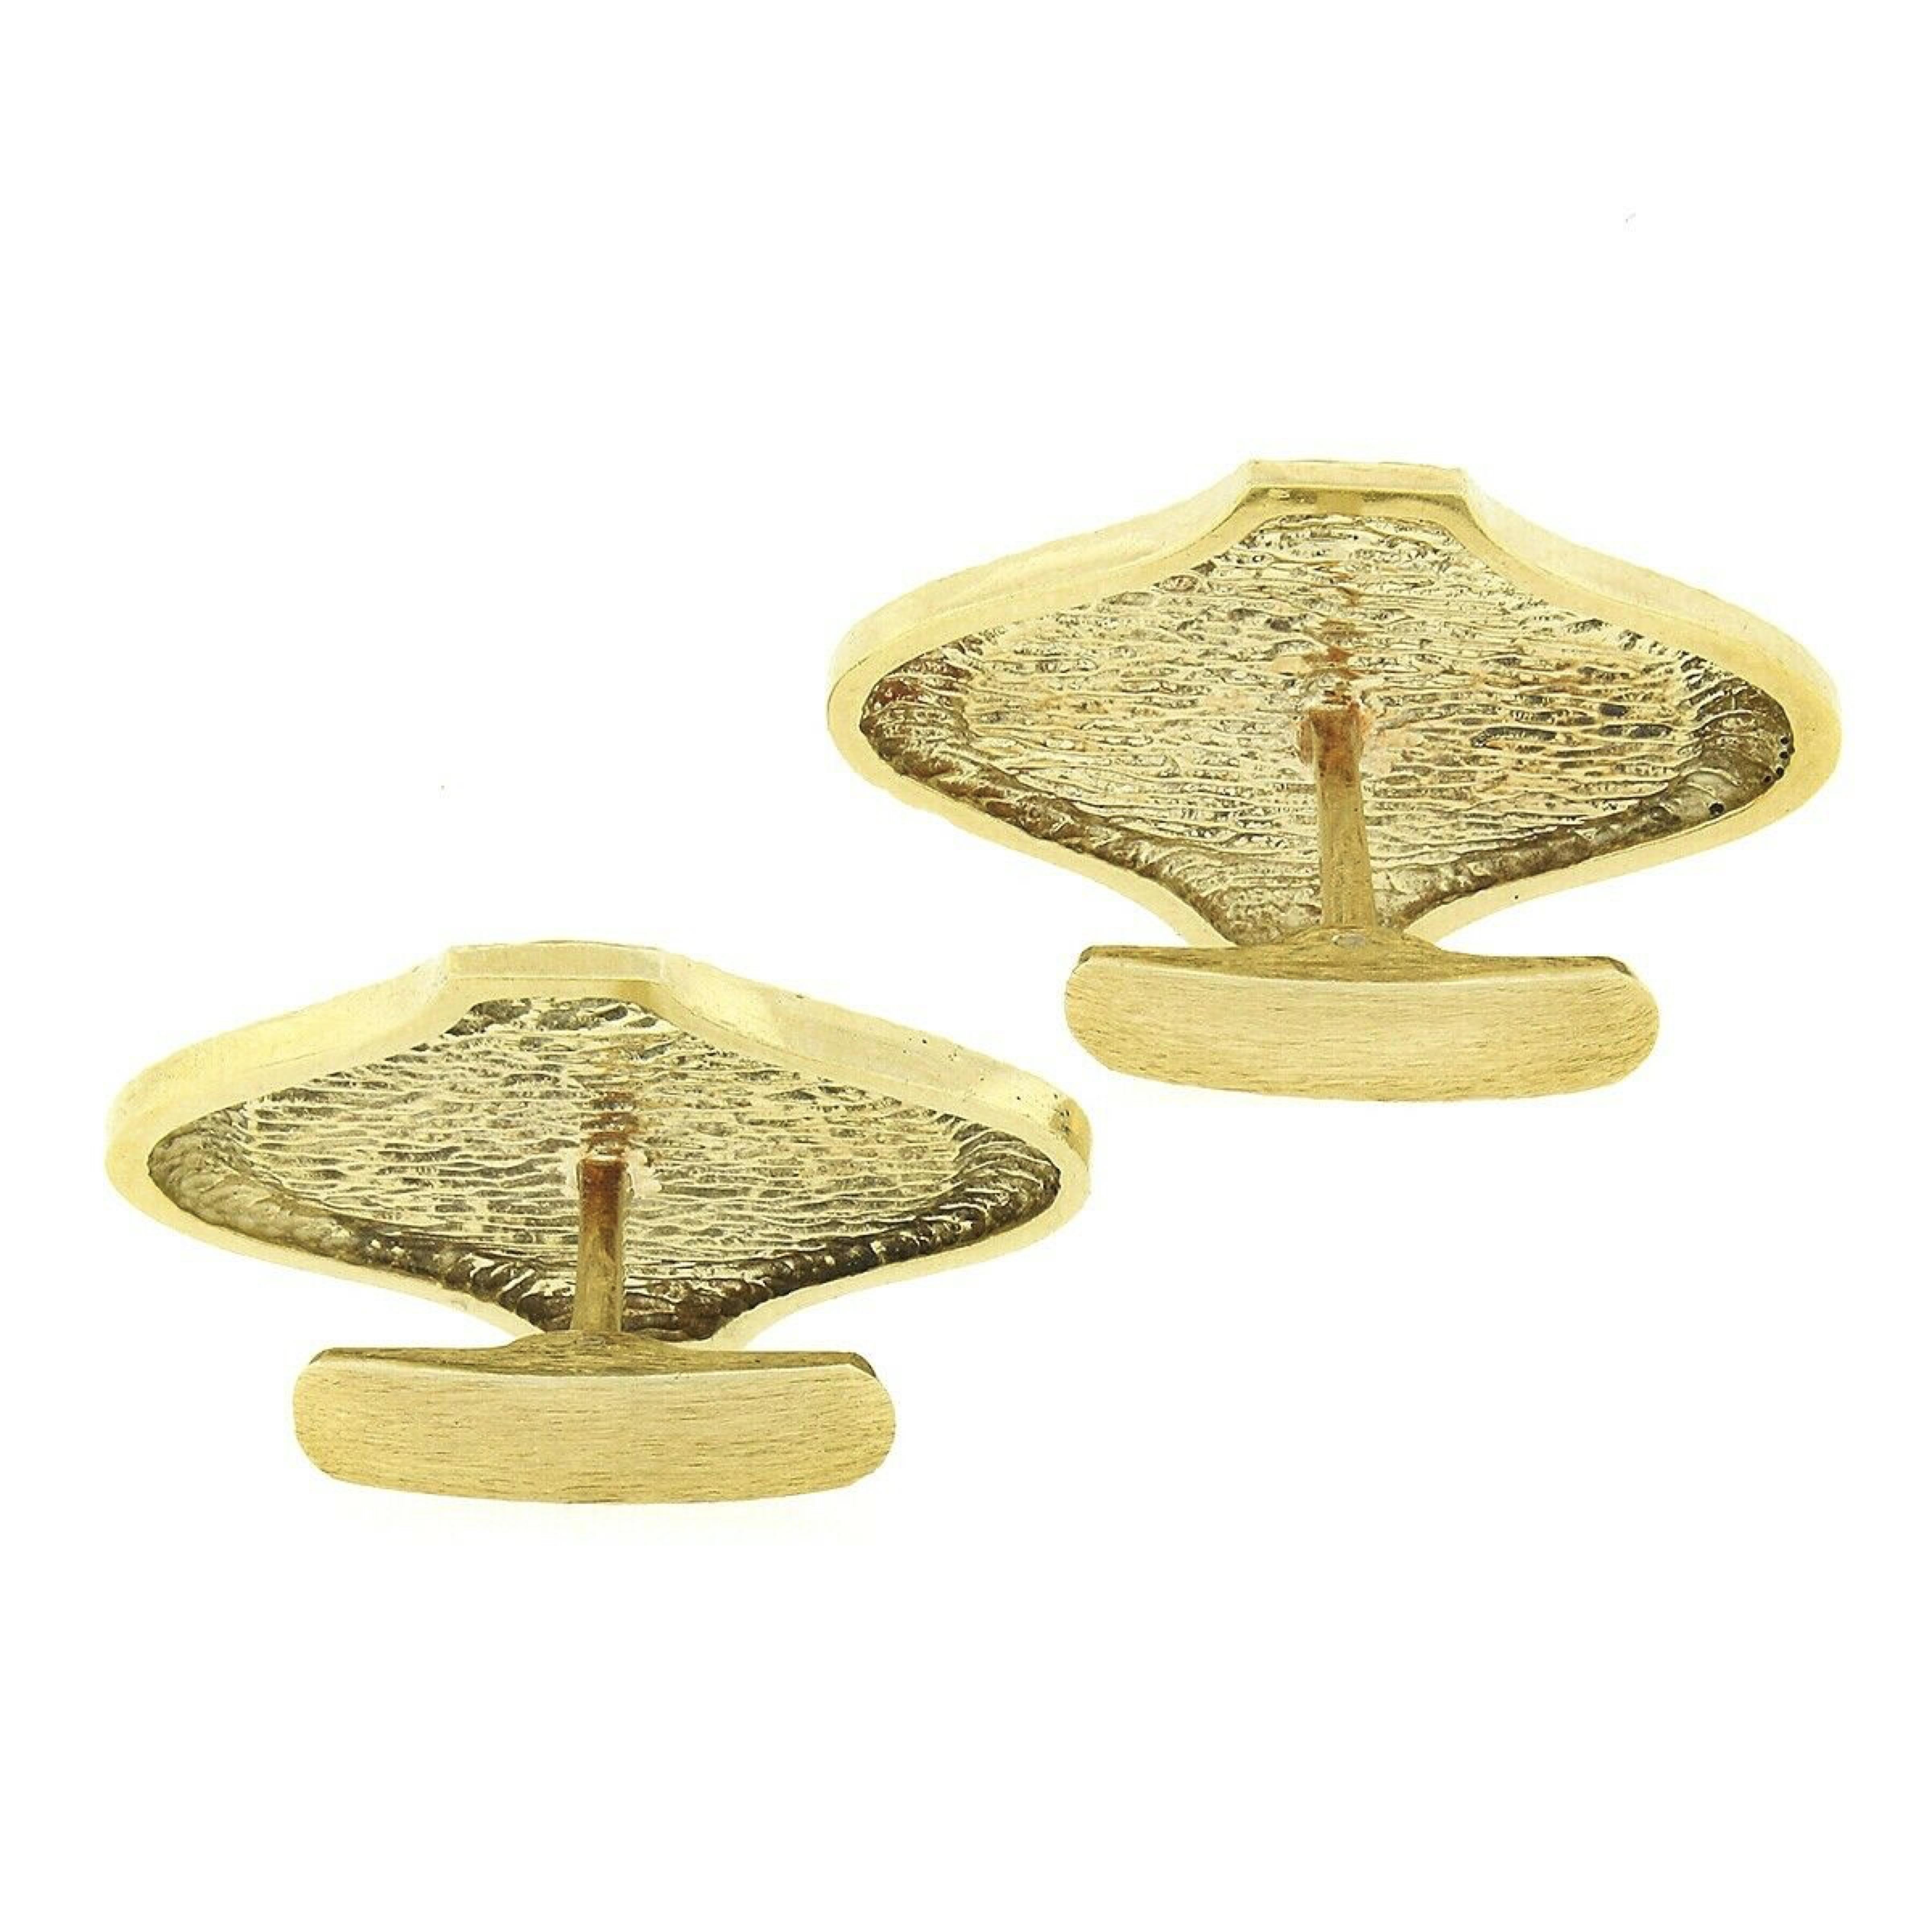 This fine pair of vintage cuff links is crafted in solid 14k yellow gold and features a large design with one link set with a natural tiger's eye stone and the other set with a natural lapis at their center. Each of these large polished stones is